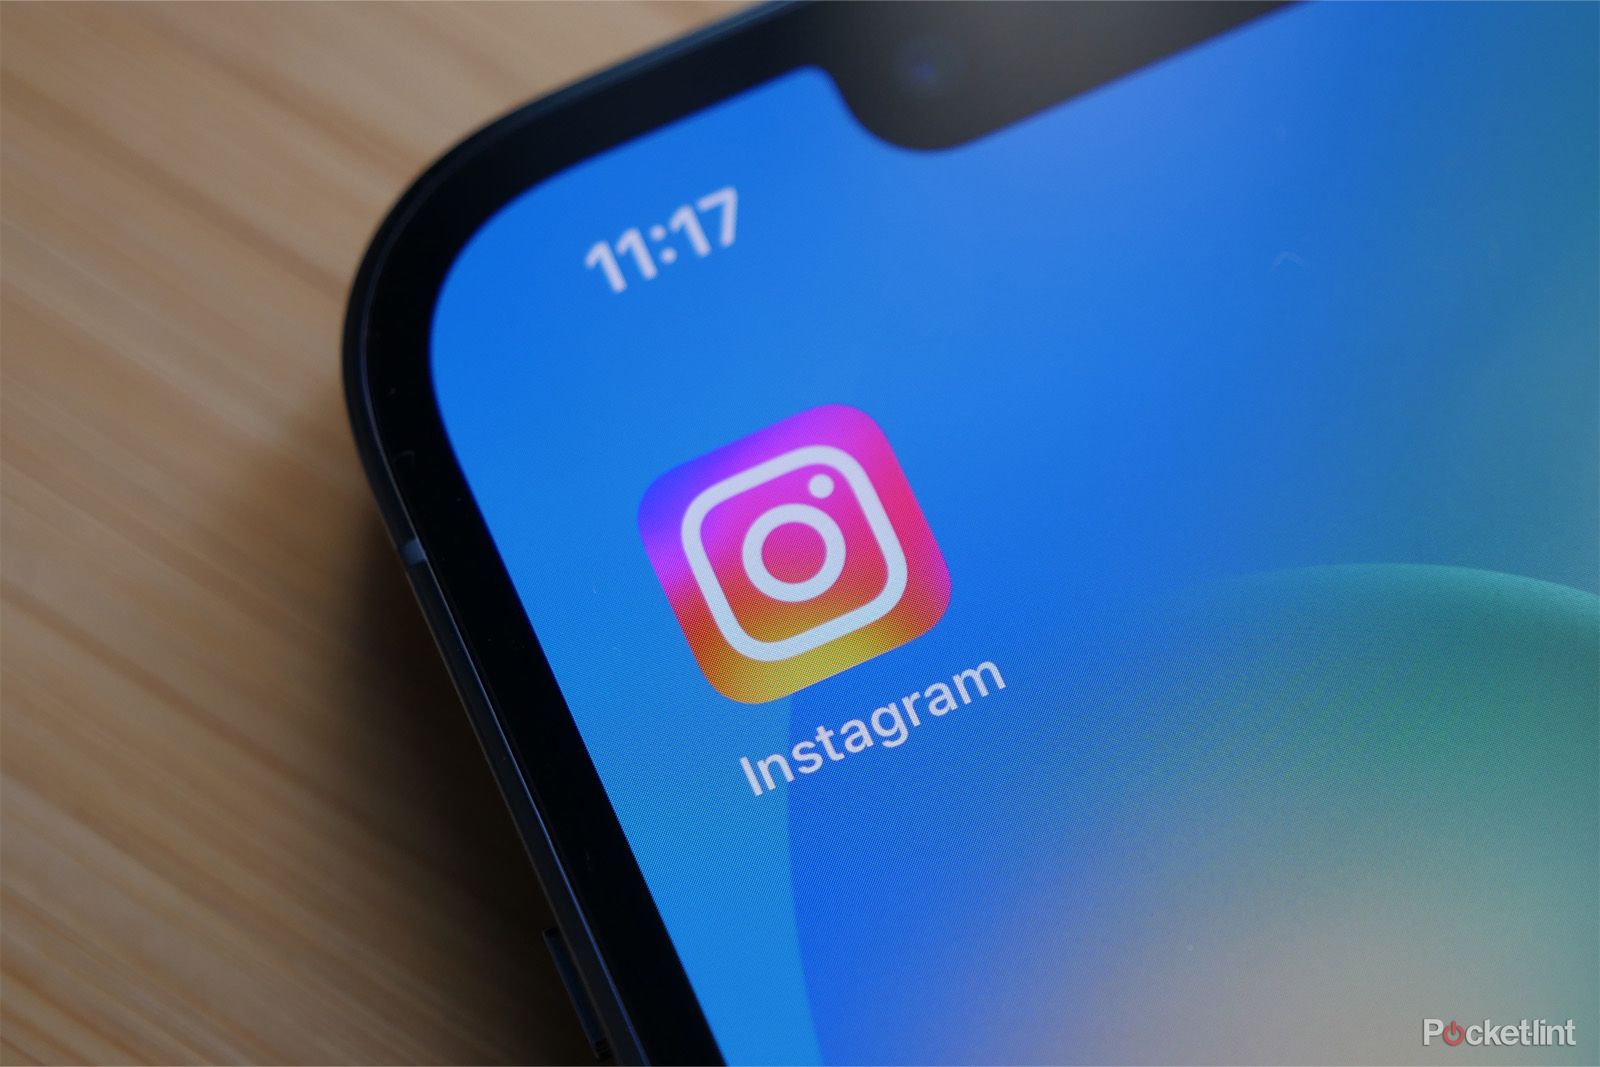 How to send a note on Instagram